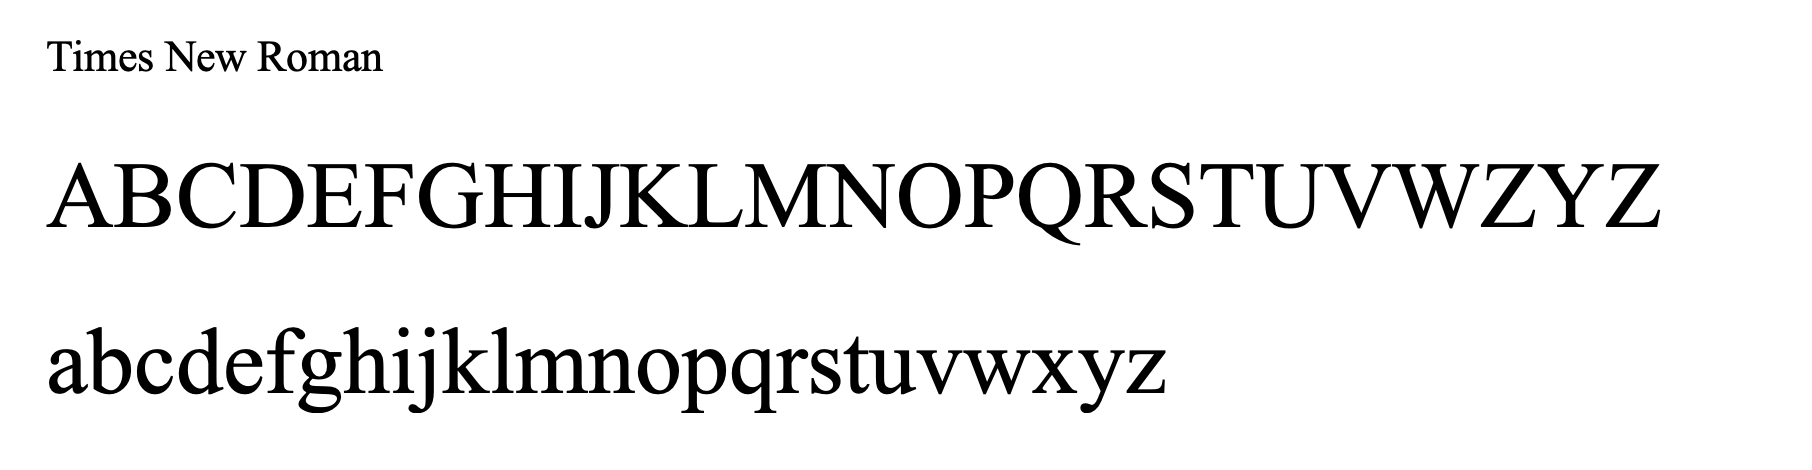 Times New Roman - email signature font